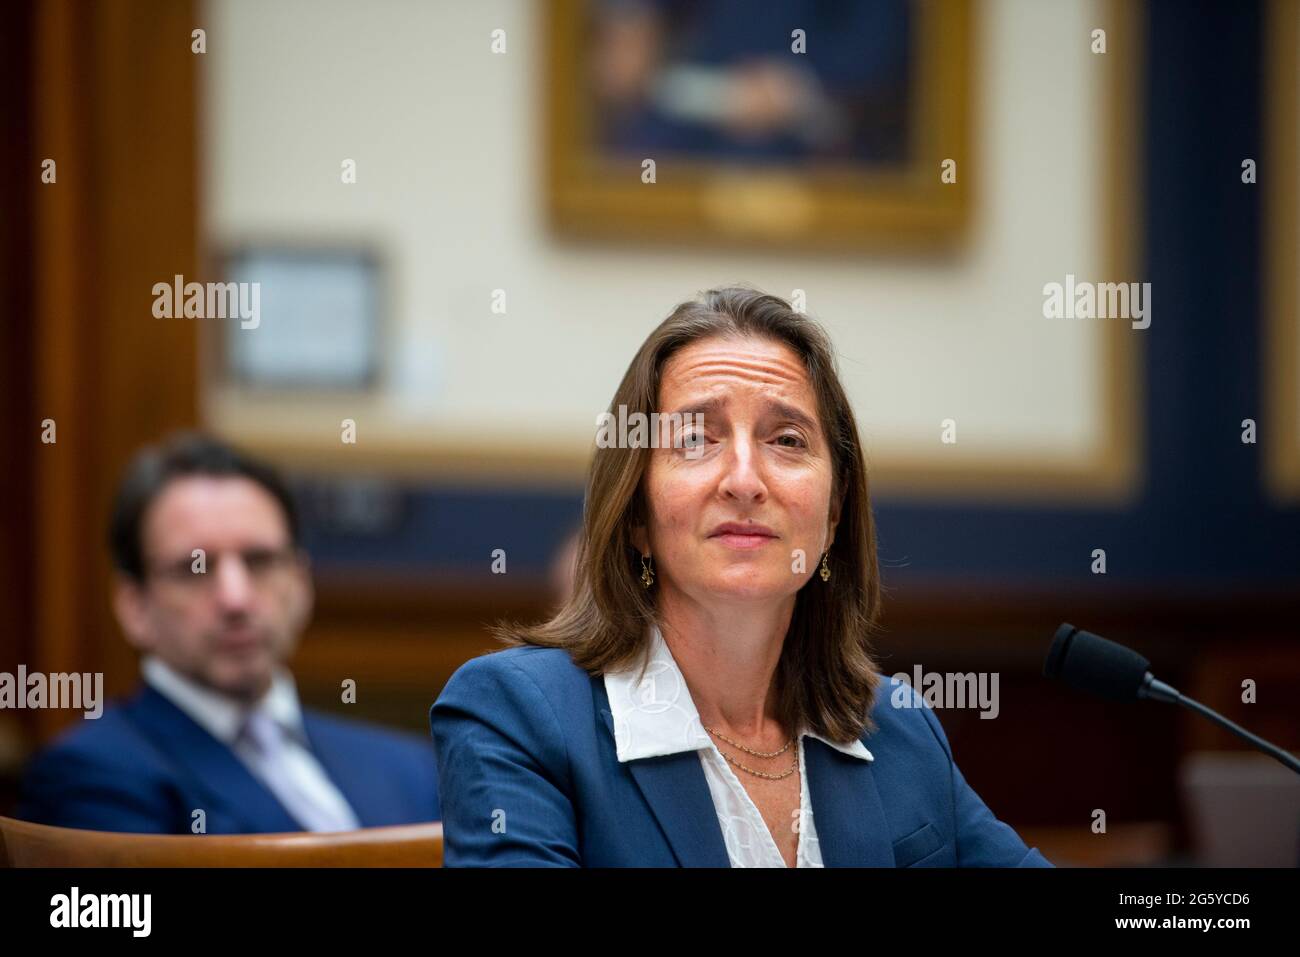 Washington, United States Of America. 30th June, 2021. Lynn Oberlander of Counsel, Ballard Spahr LLP, appears before a House Committee on the Judiciary hearing “Secrecy Orders and Prosecuting Leaks: Potential Legislative Responses to Deter Prosecutorial Abuse of Power” in the Rayburn House Office Building in Washington, DC, Wednesday, June 30, 2021. Credit: Rod Lamkey/CNP/Sipa USA Credit: Sipa USA/Alamy Live News Stock Photo